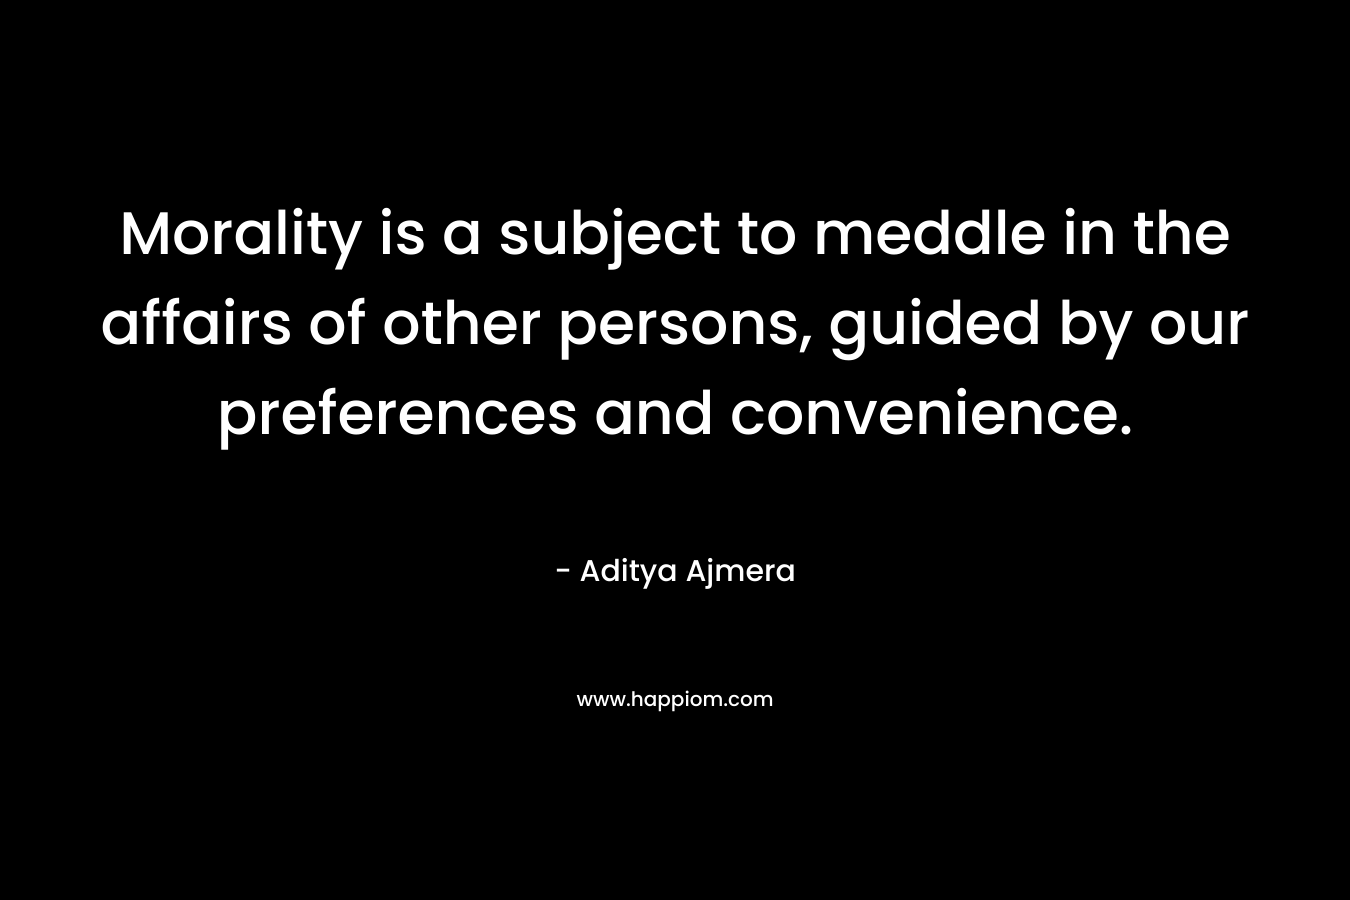 Morality is a subject to meddle in the affairs of other persons, guided by our preferences and convenience. – Aditya Ajmera